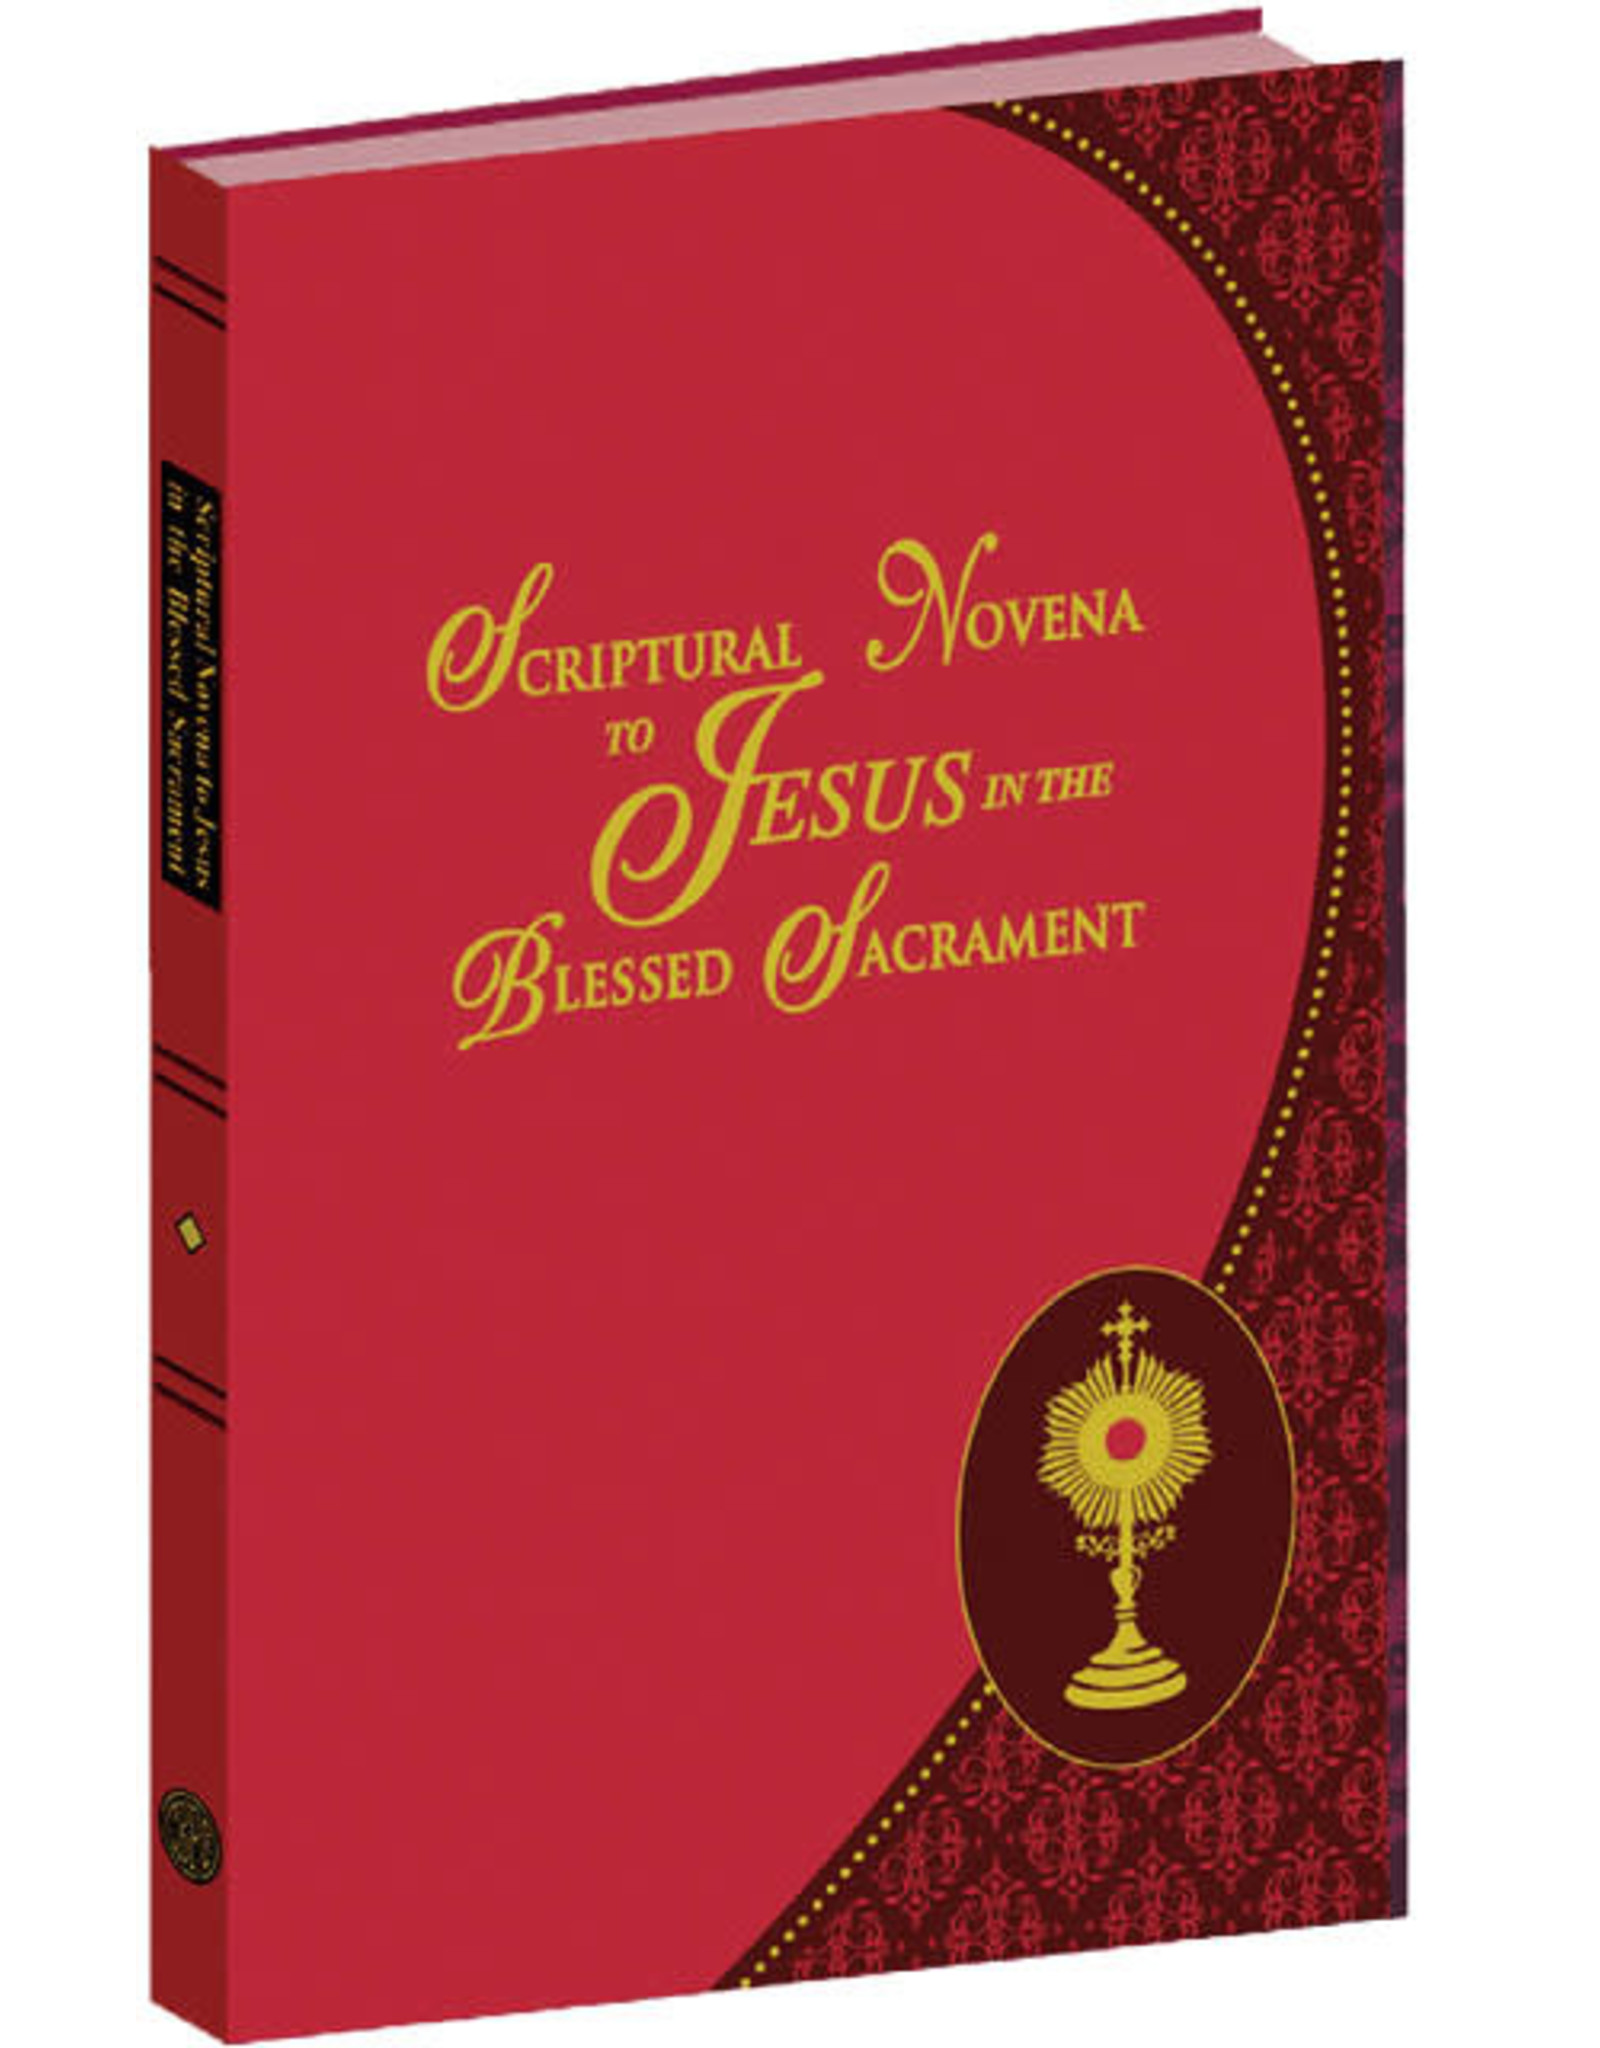 Catholic Book Publishing Scriptural Novena to Jesus in the Blessed Sacrament